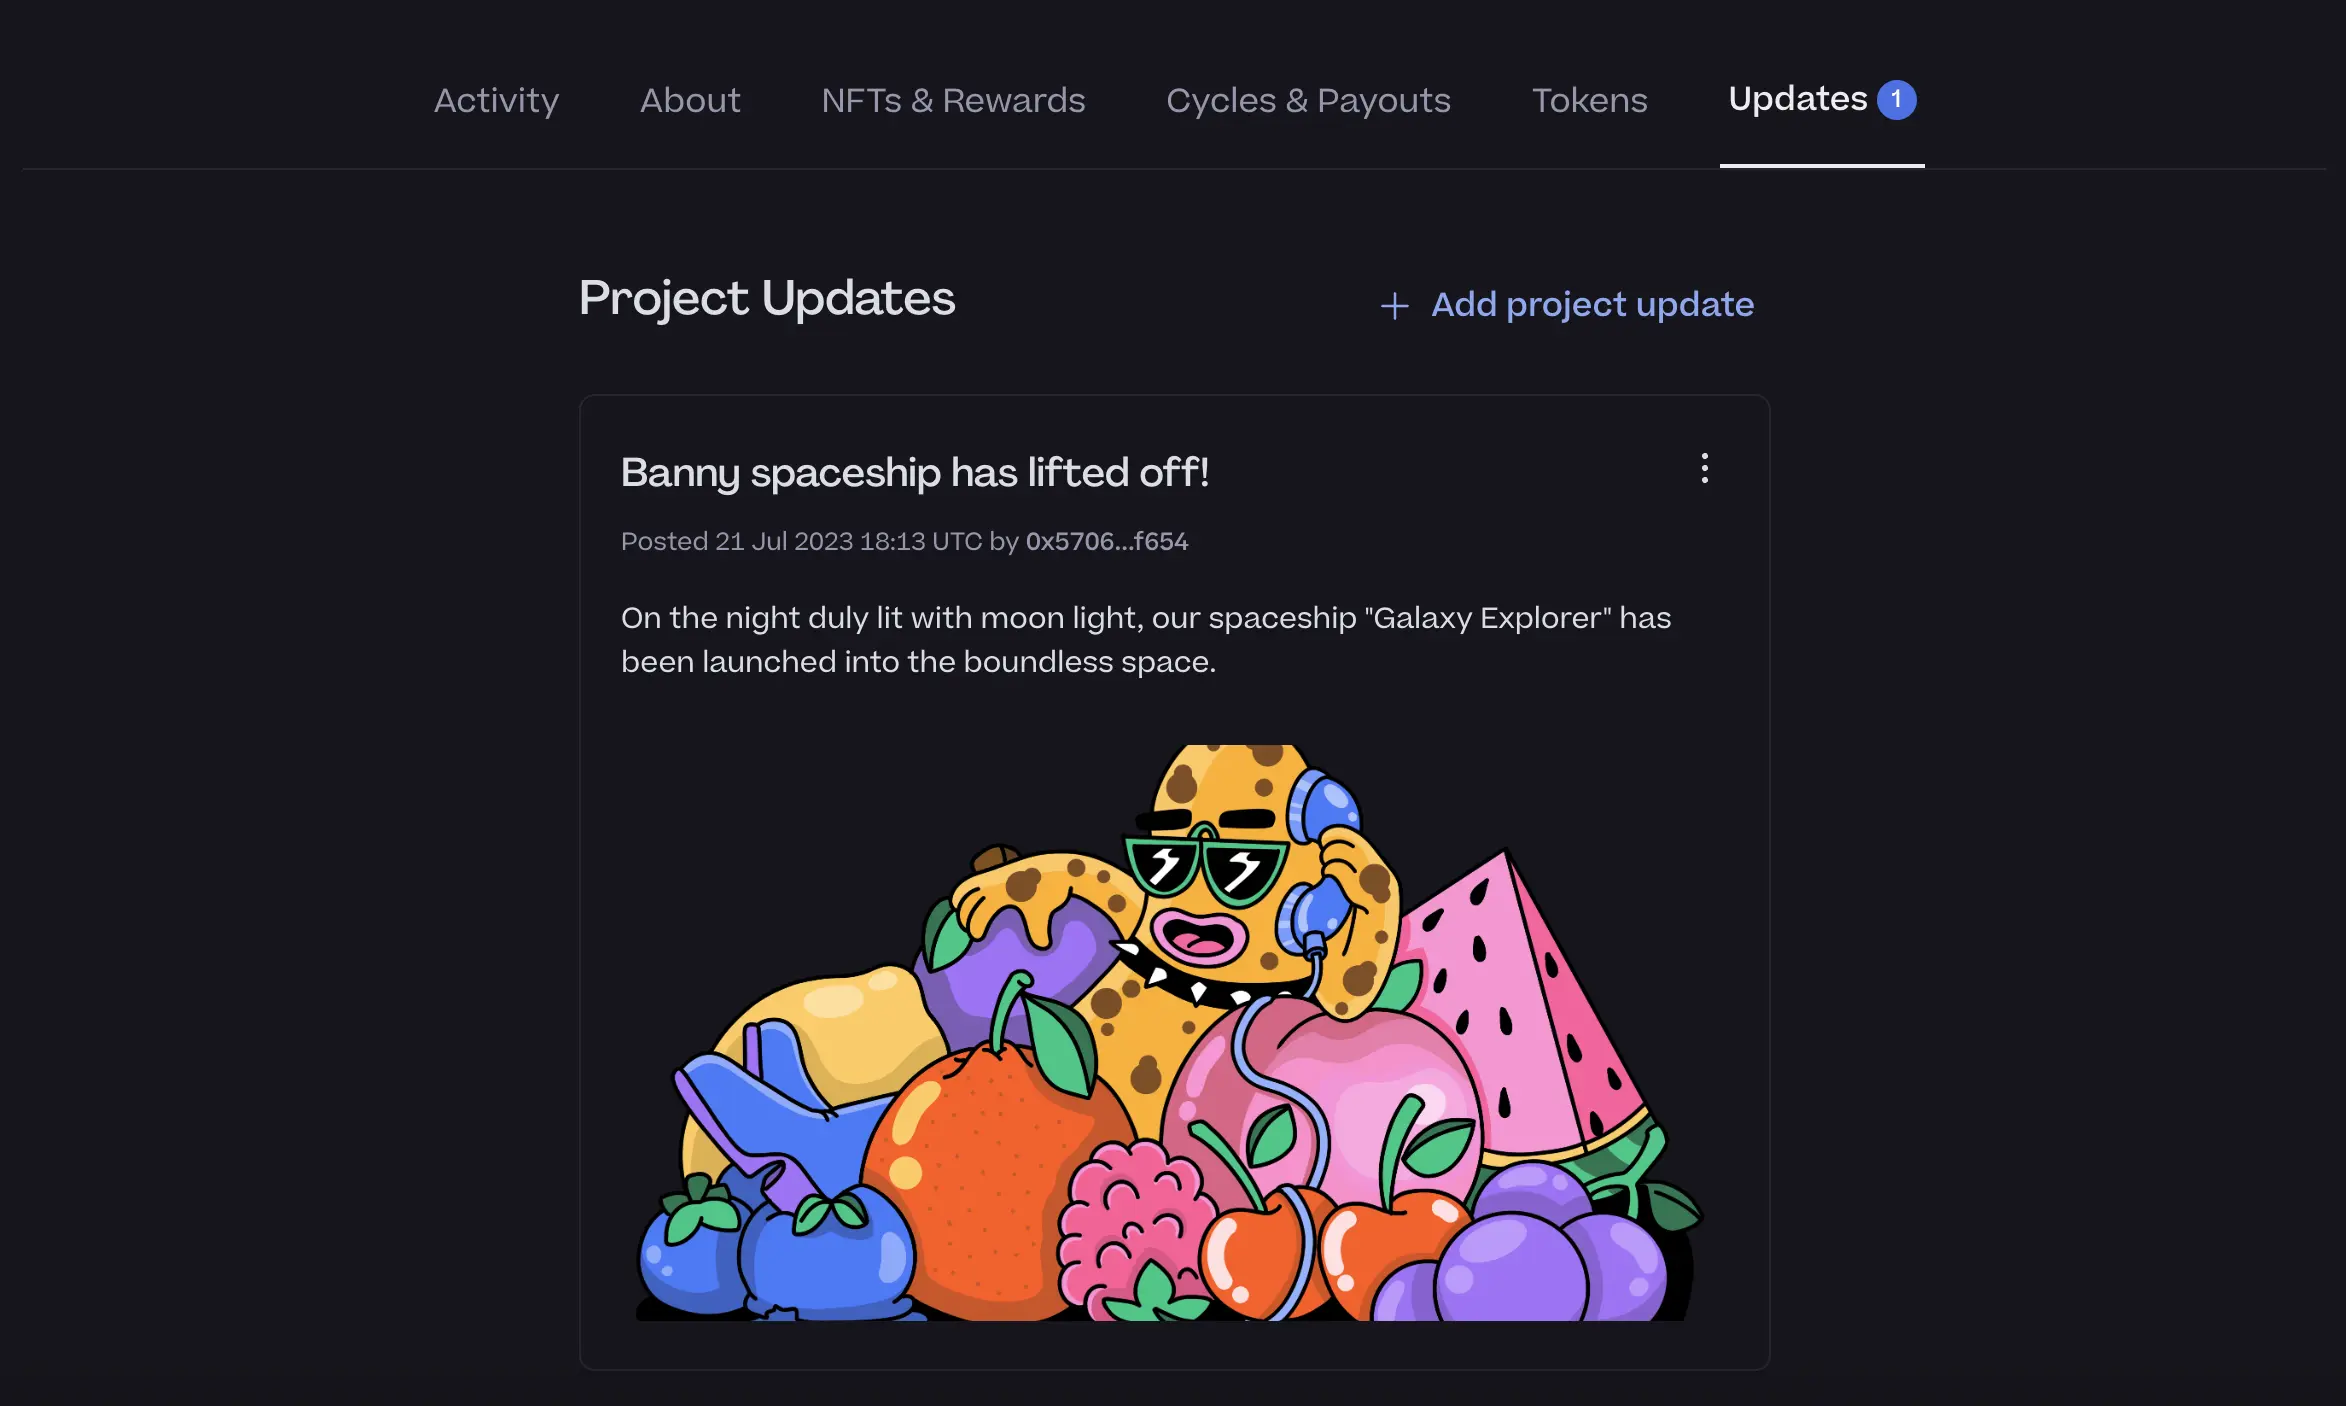 new feature of project updates